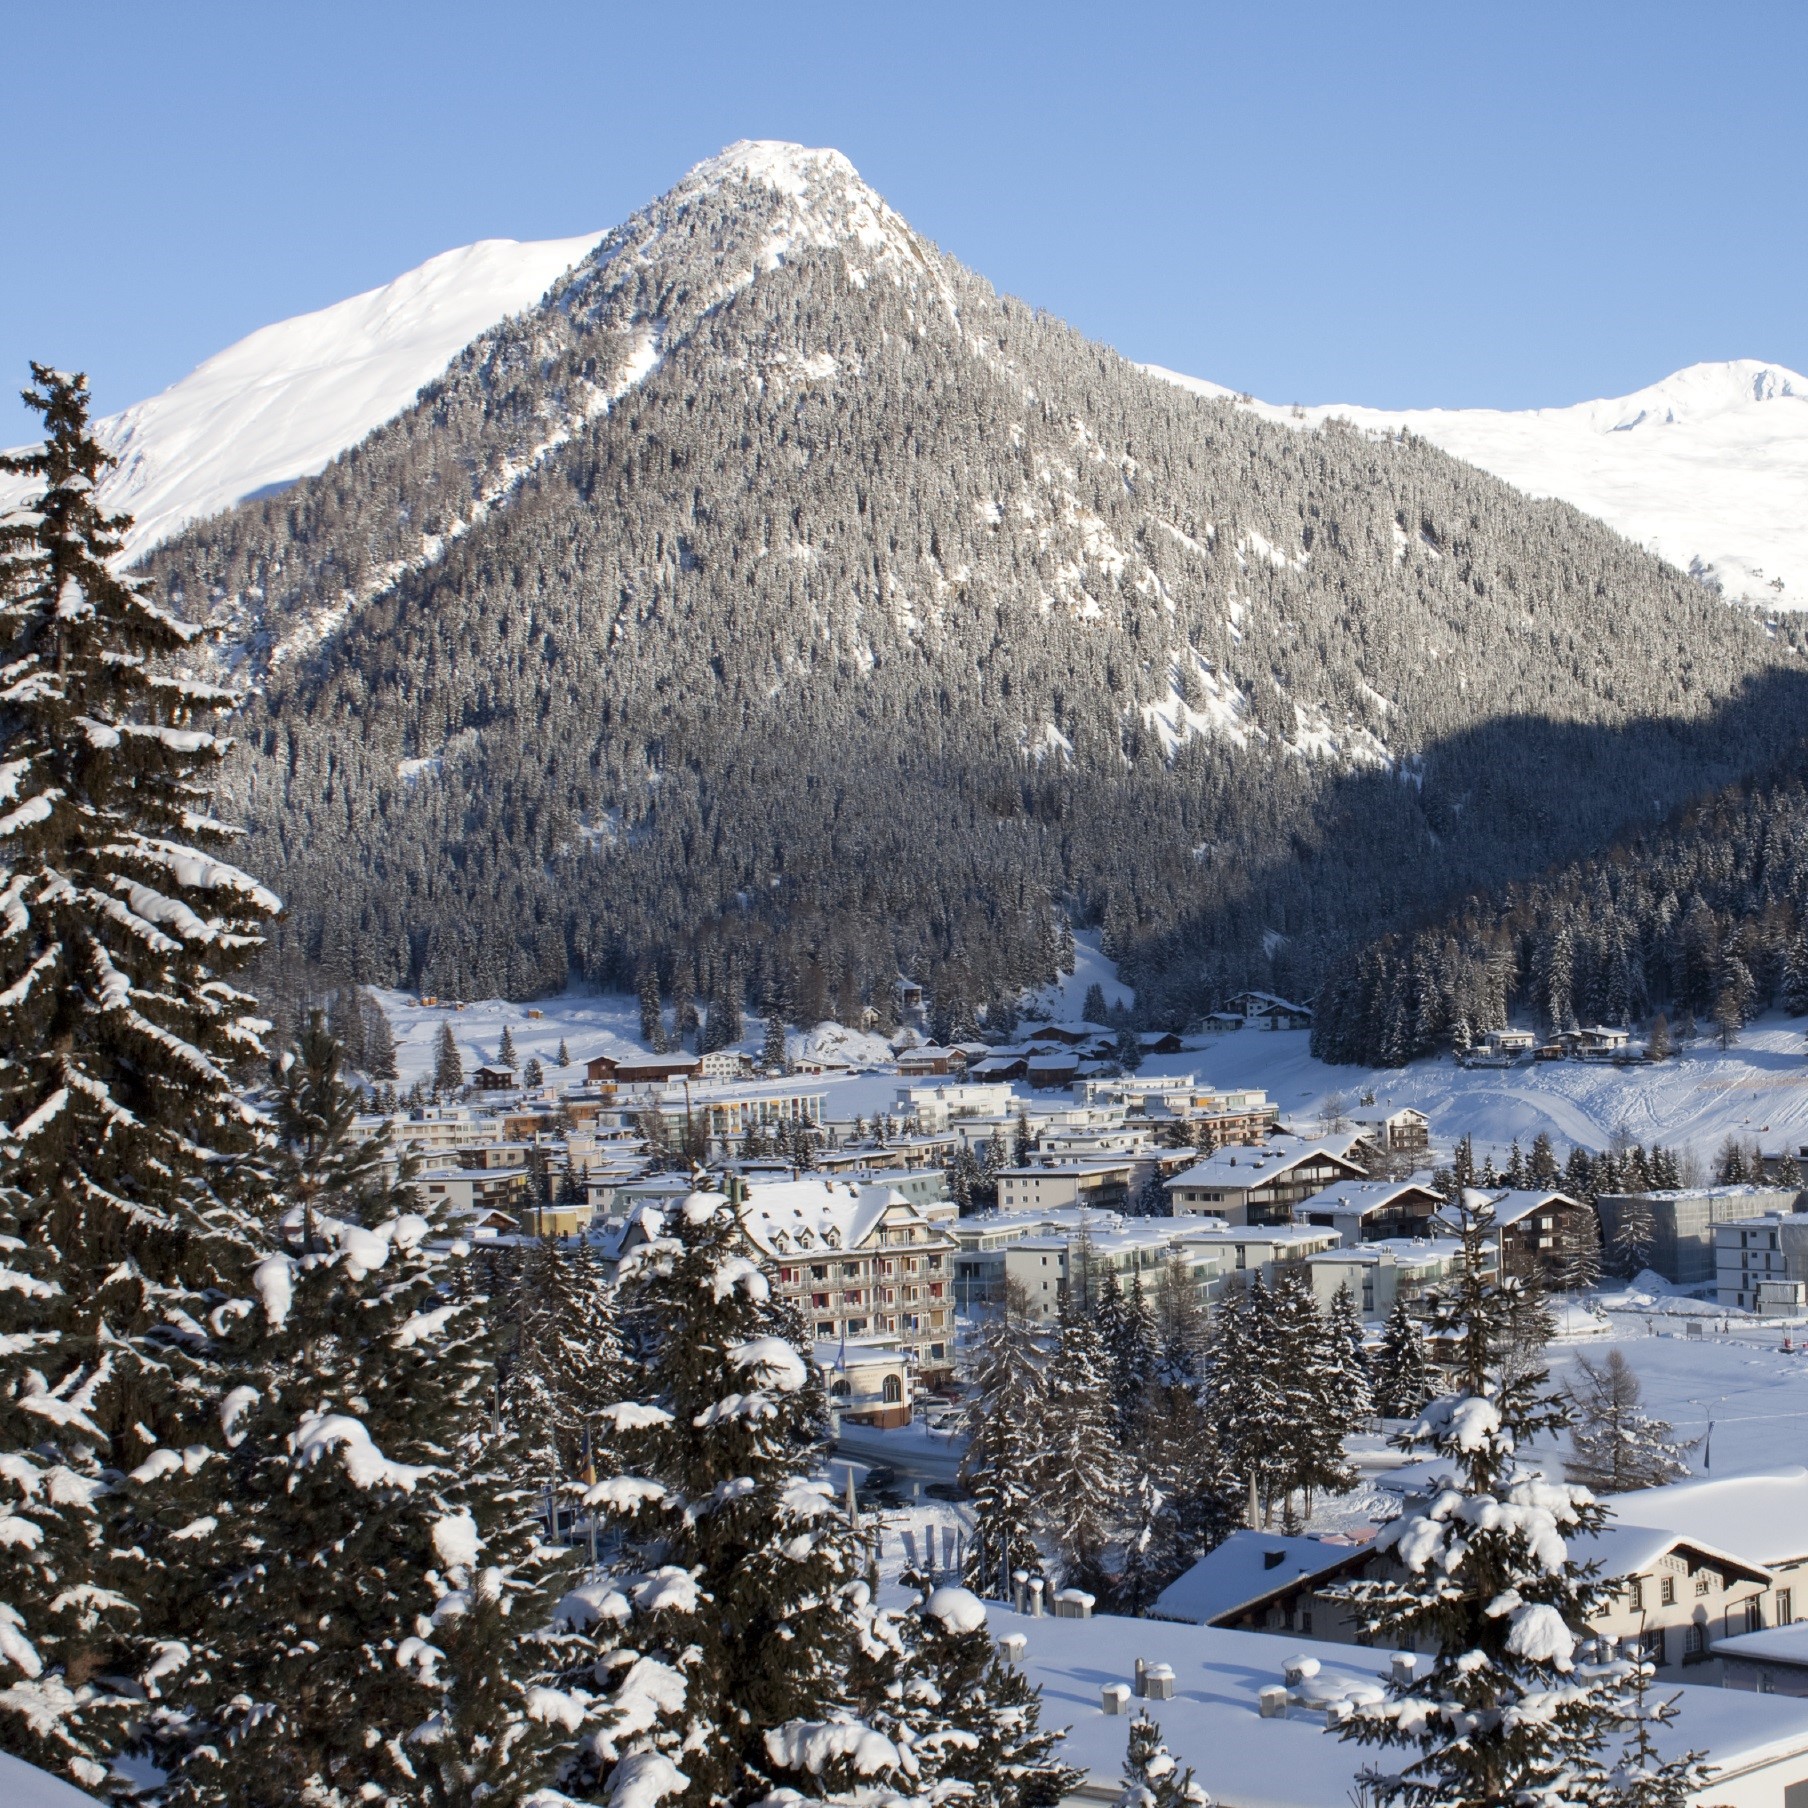 Global Views from the World Economic Forum at Davos, Switzerland